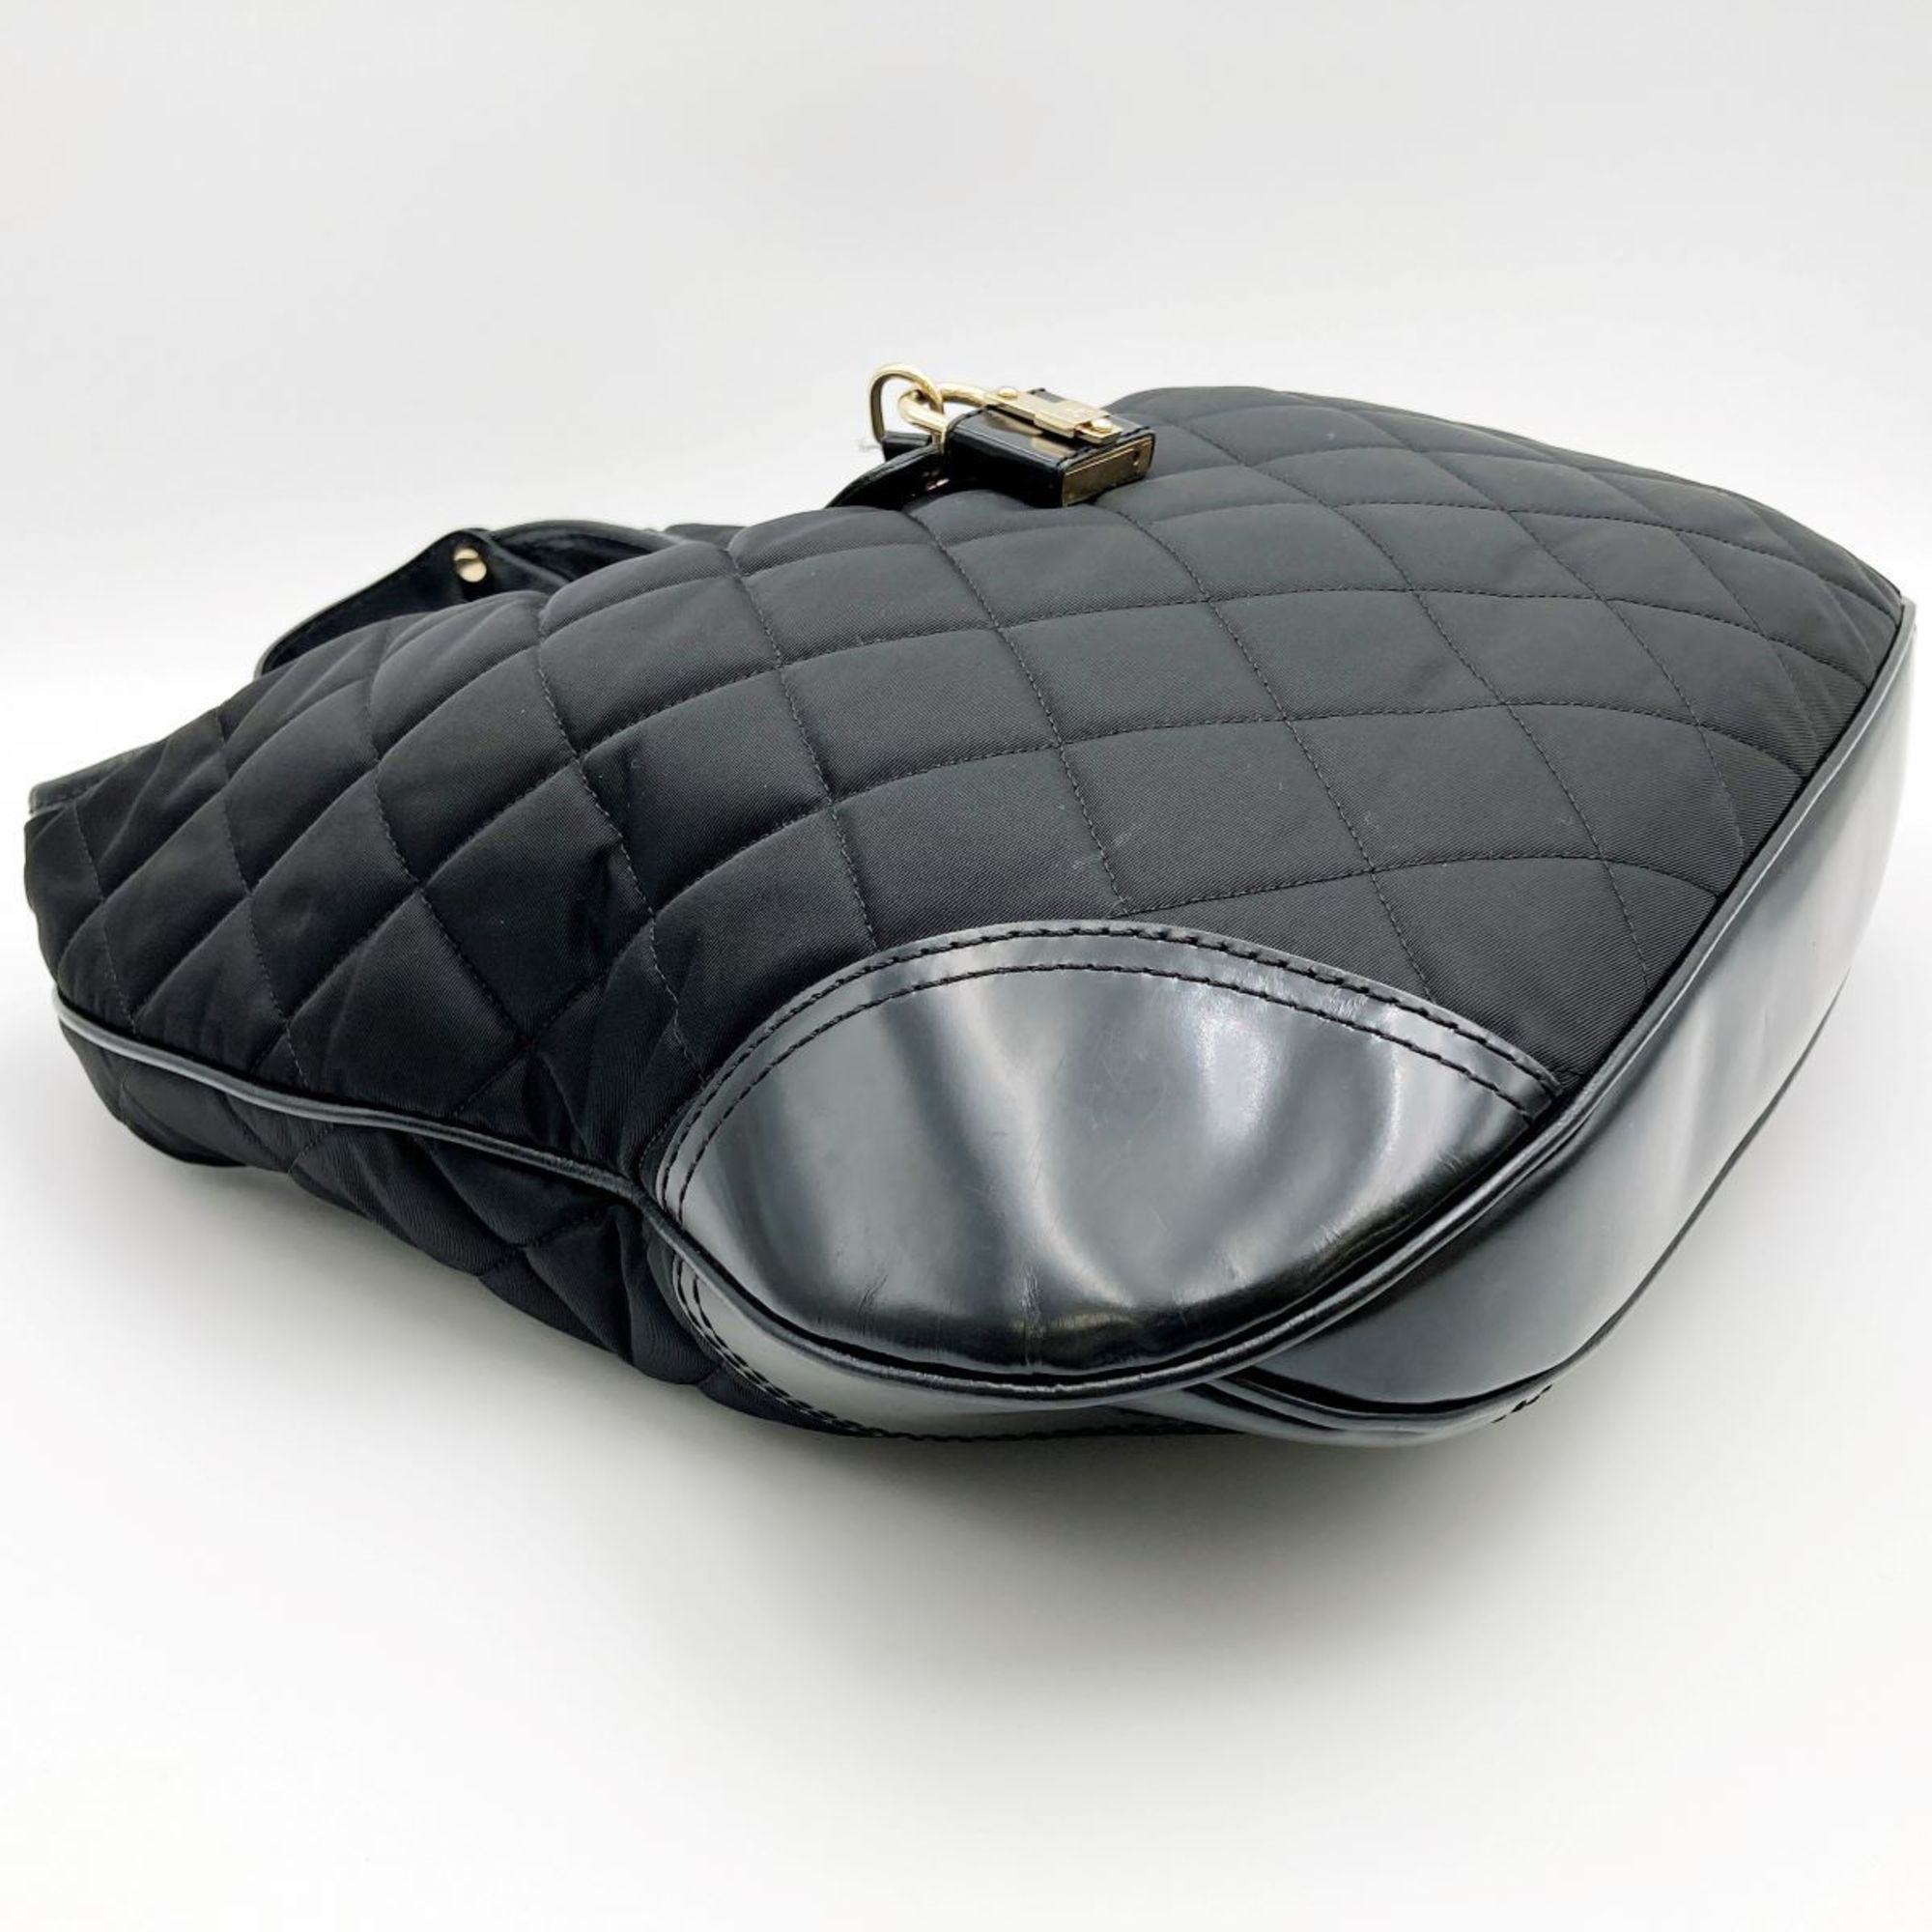 BURBERRY Shoulder Bag Hobo Quilted Black Nylon Leather Ladies